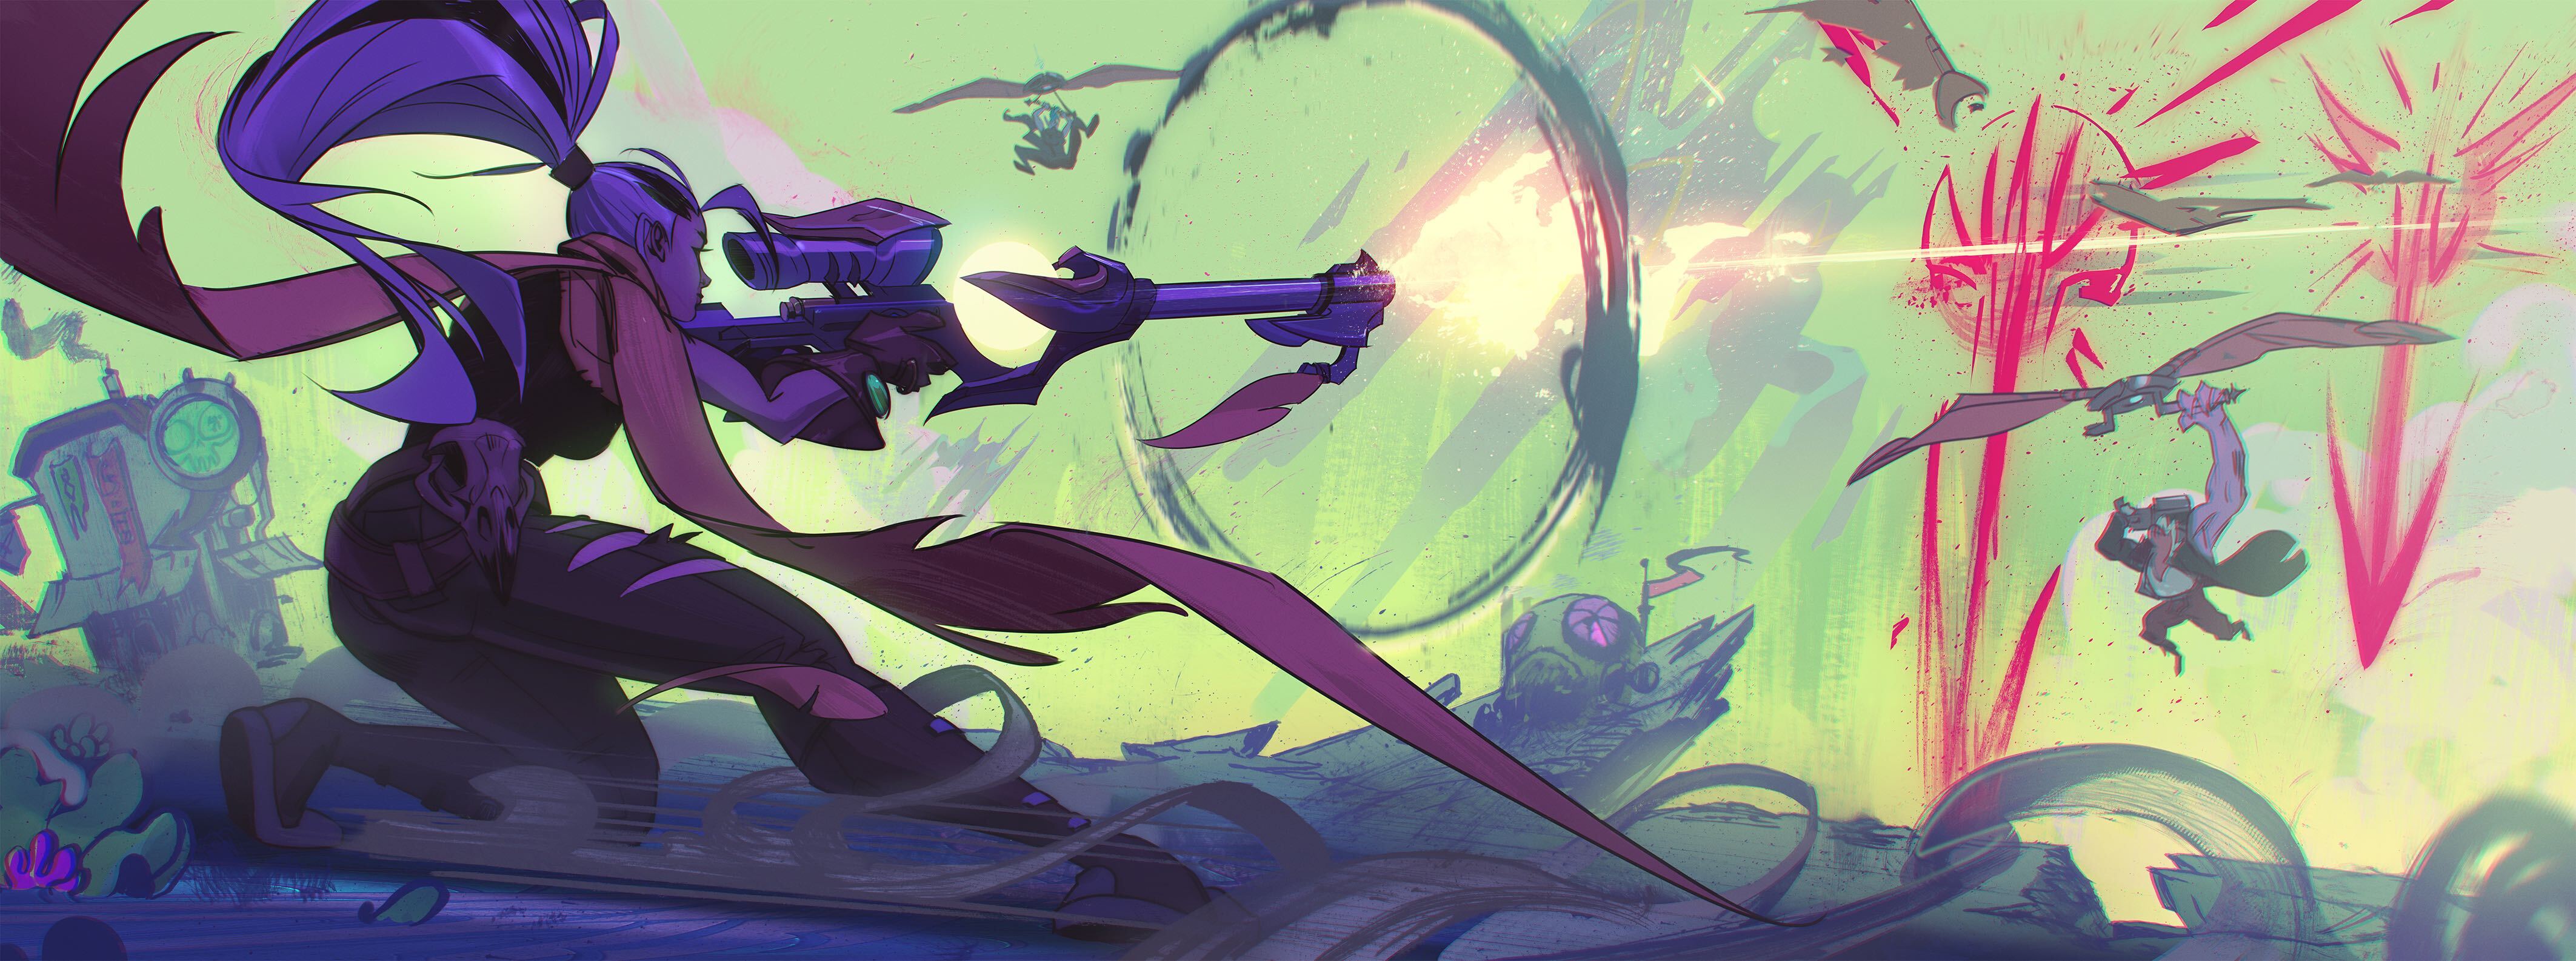 Colorful and fantastical heroes fight with guns and swords in concept art for Project Loki from Theorycraft Games.